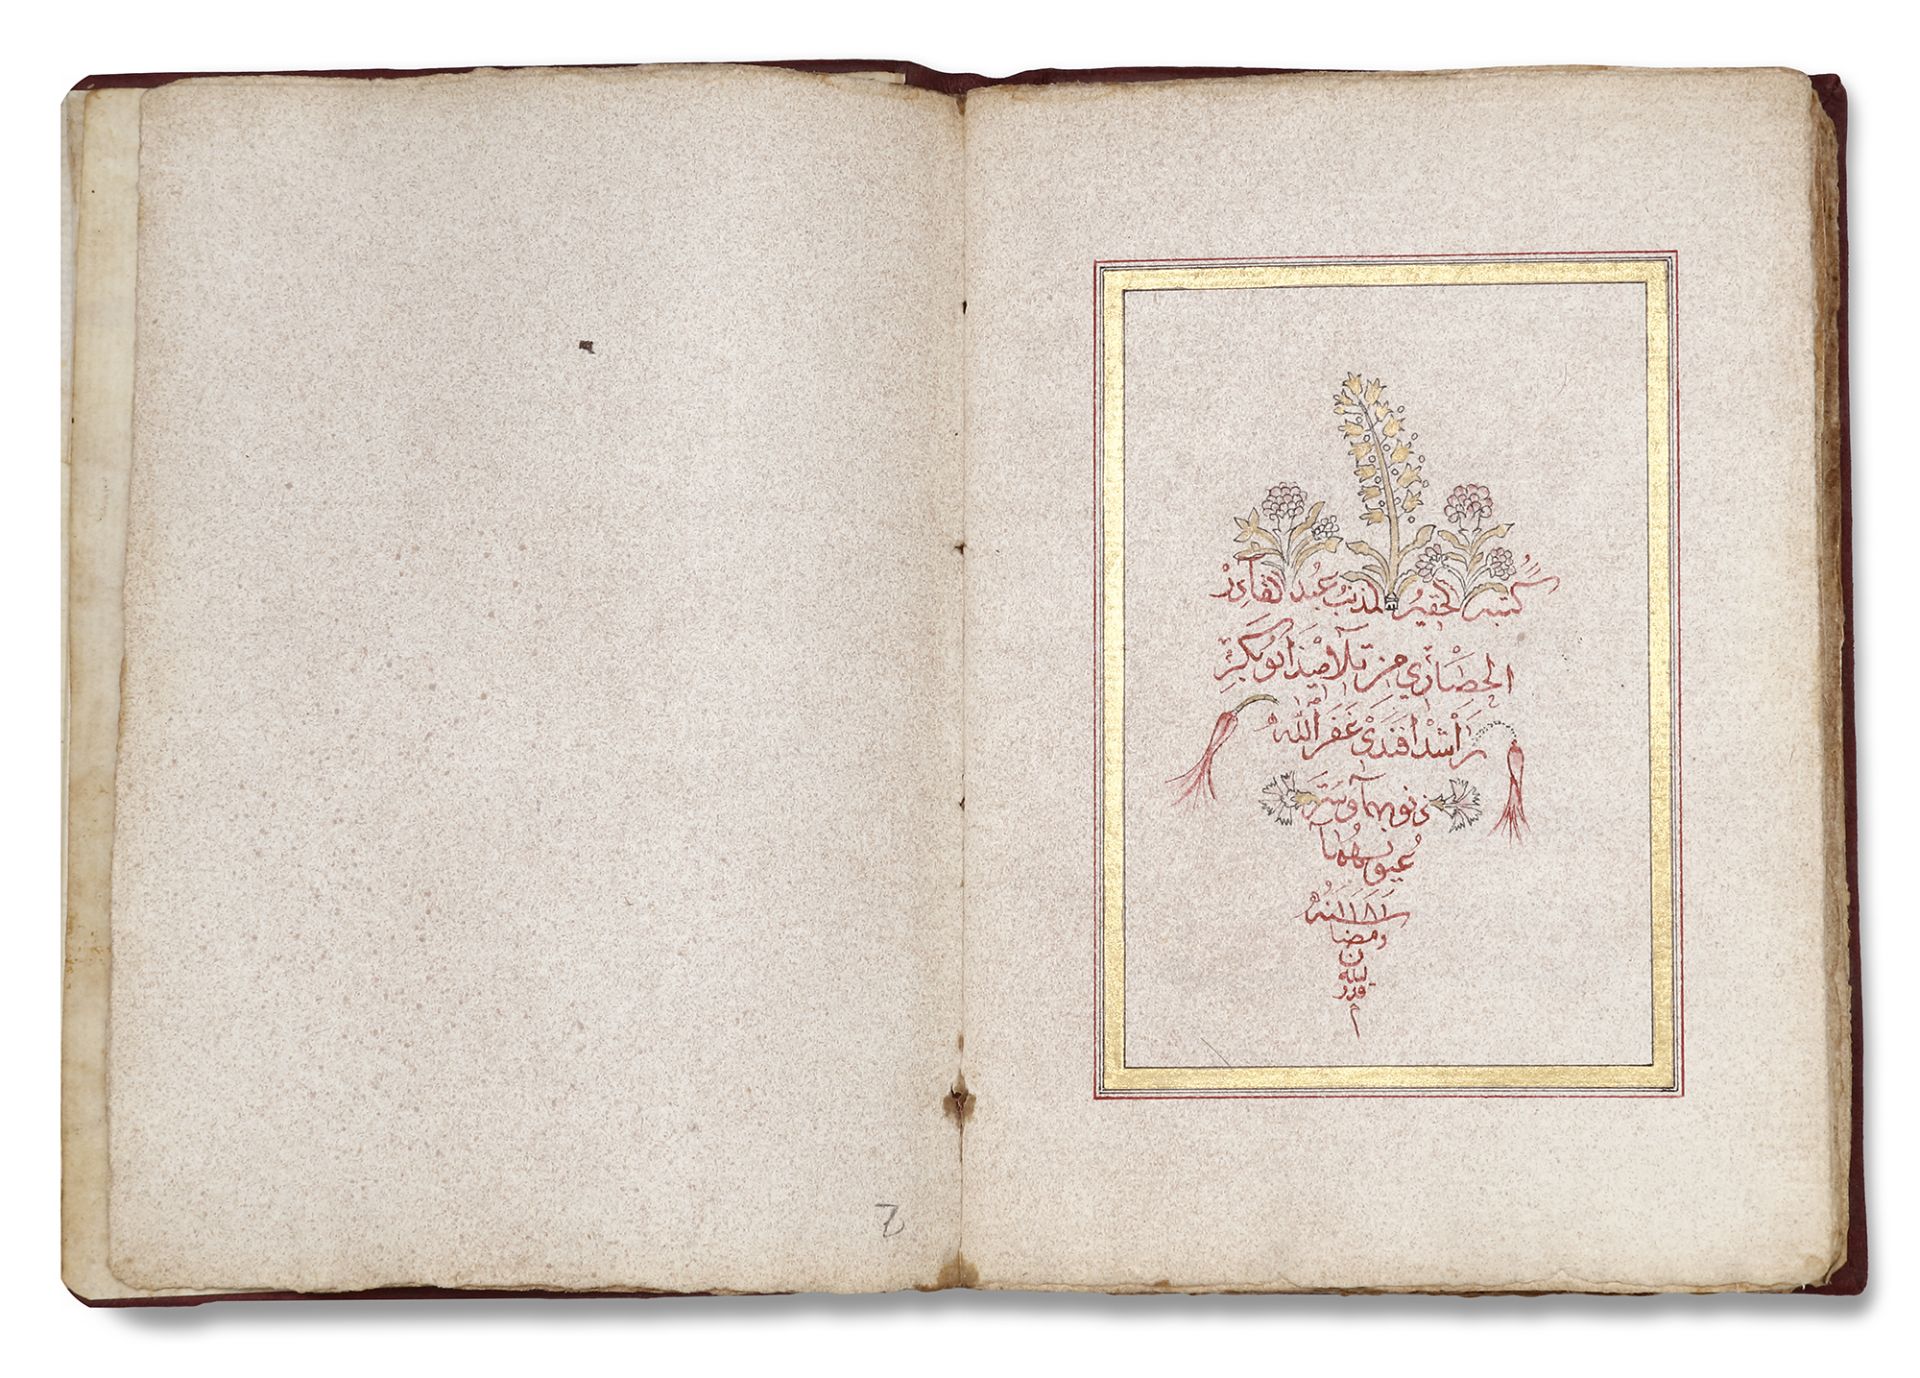 AN OTTOMAN COMPILATION OF PRAYERS AND HOLY PLACES BY ABD AL-QADIR HUSRI, OTTOMAN TURKEY, DATED 1181 - Image 10 of 12